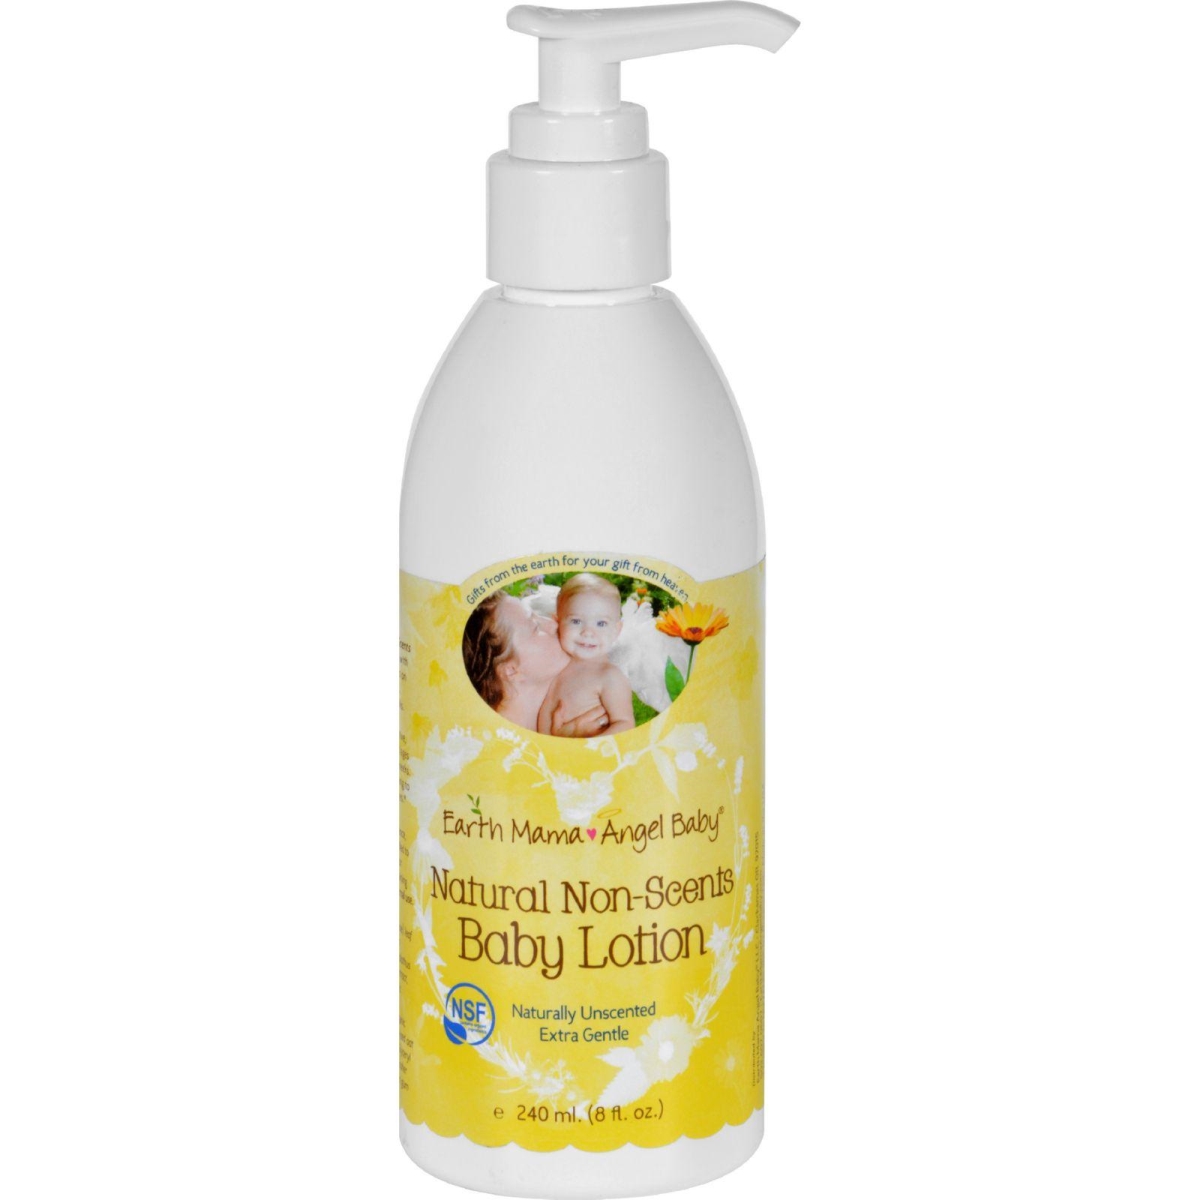 Hg1648492 8 Oz Baby Lotion - Natural Non-scents, Fragrance Free